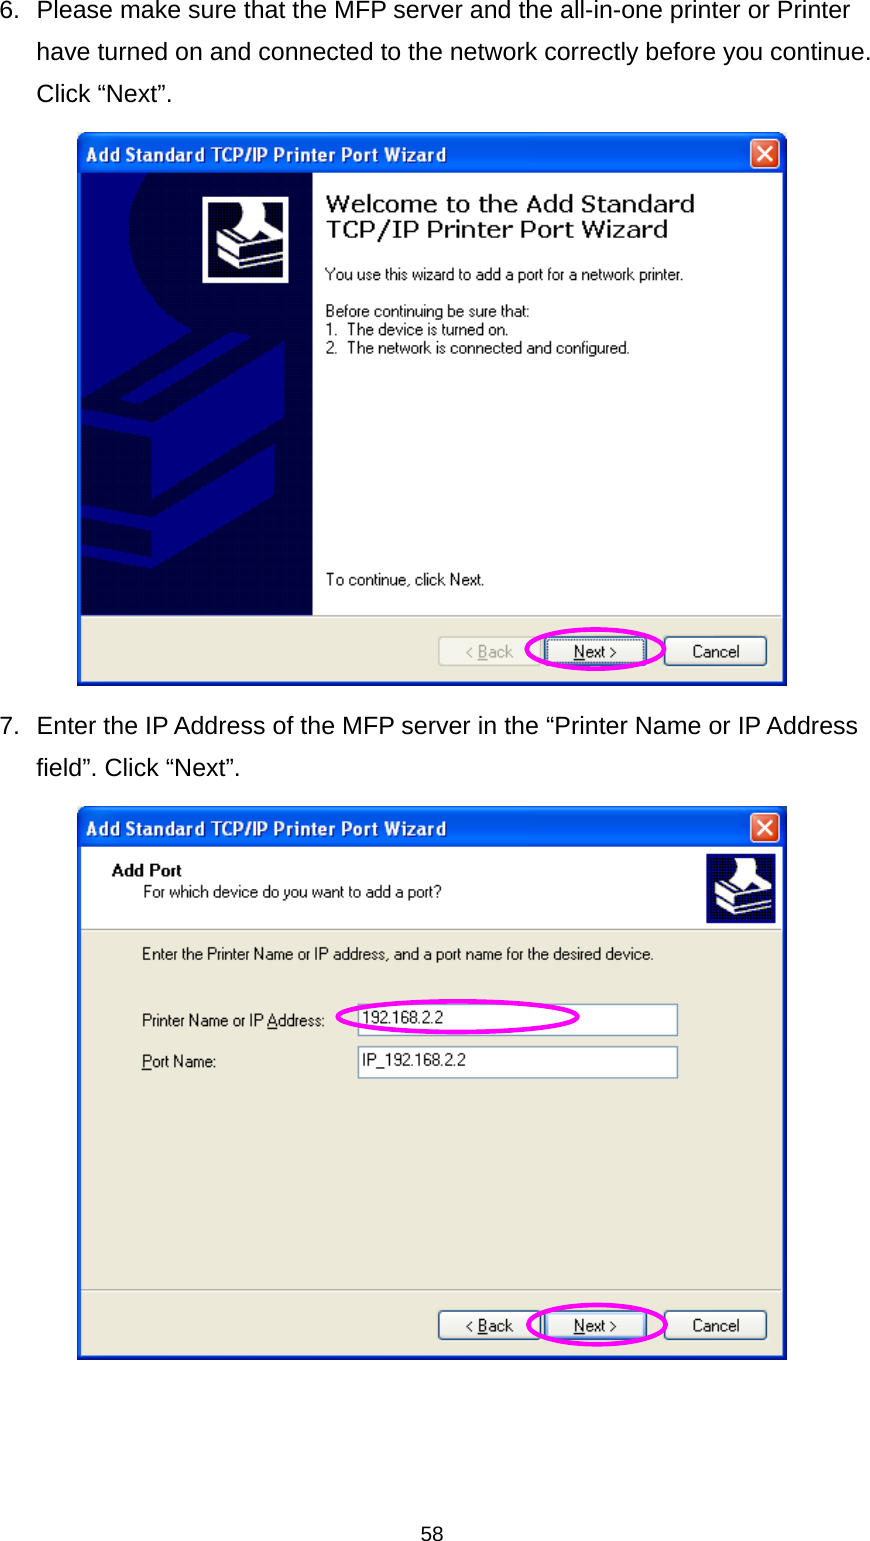 58 6.  Please make sure that the MFP server and the all-in-one printer or Printer have turned on and connected to the network correctly before you continue. Click “Next”.  7.  Enter the IP Address of the MFP server in the “Printer Name or IP Address field”. Click “Next”.   